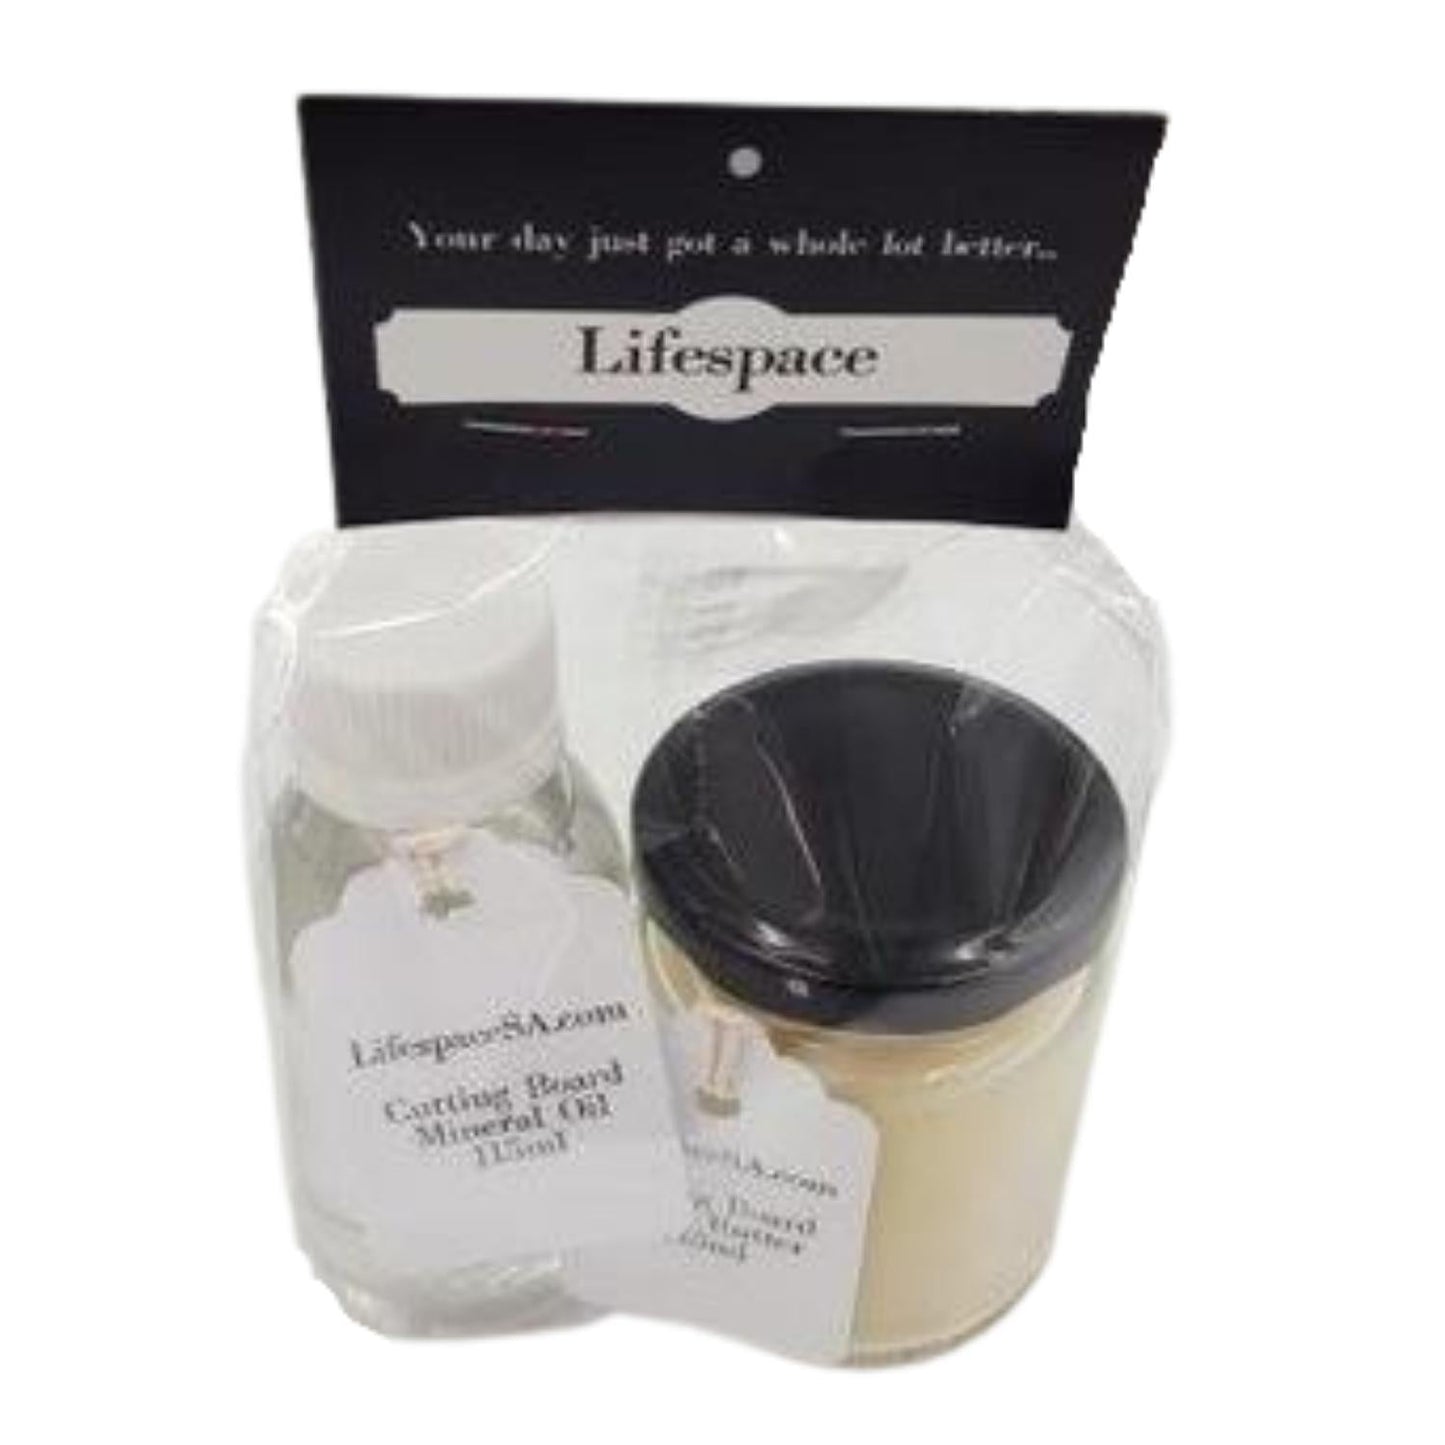 Lifespace cutting board mineral oil and Lifespace cutting board wood butter Gift Set - Lifespace